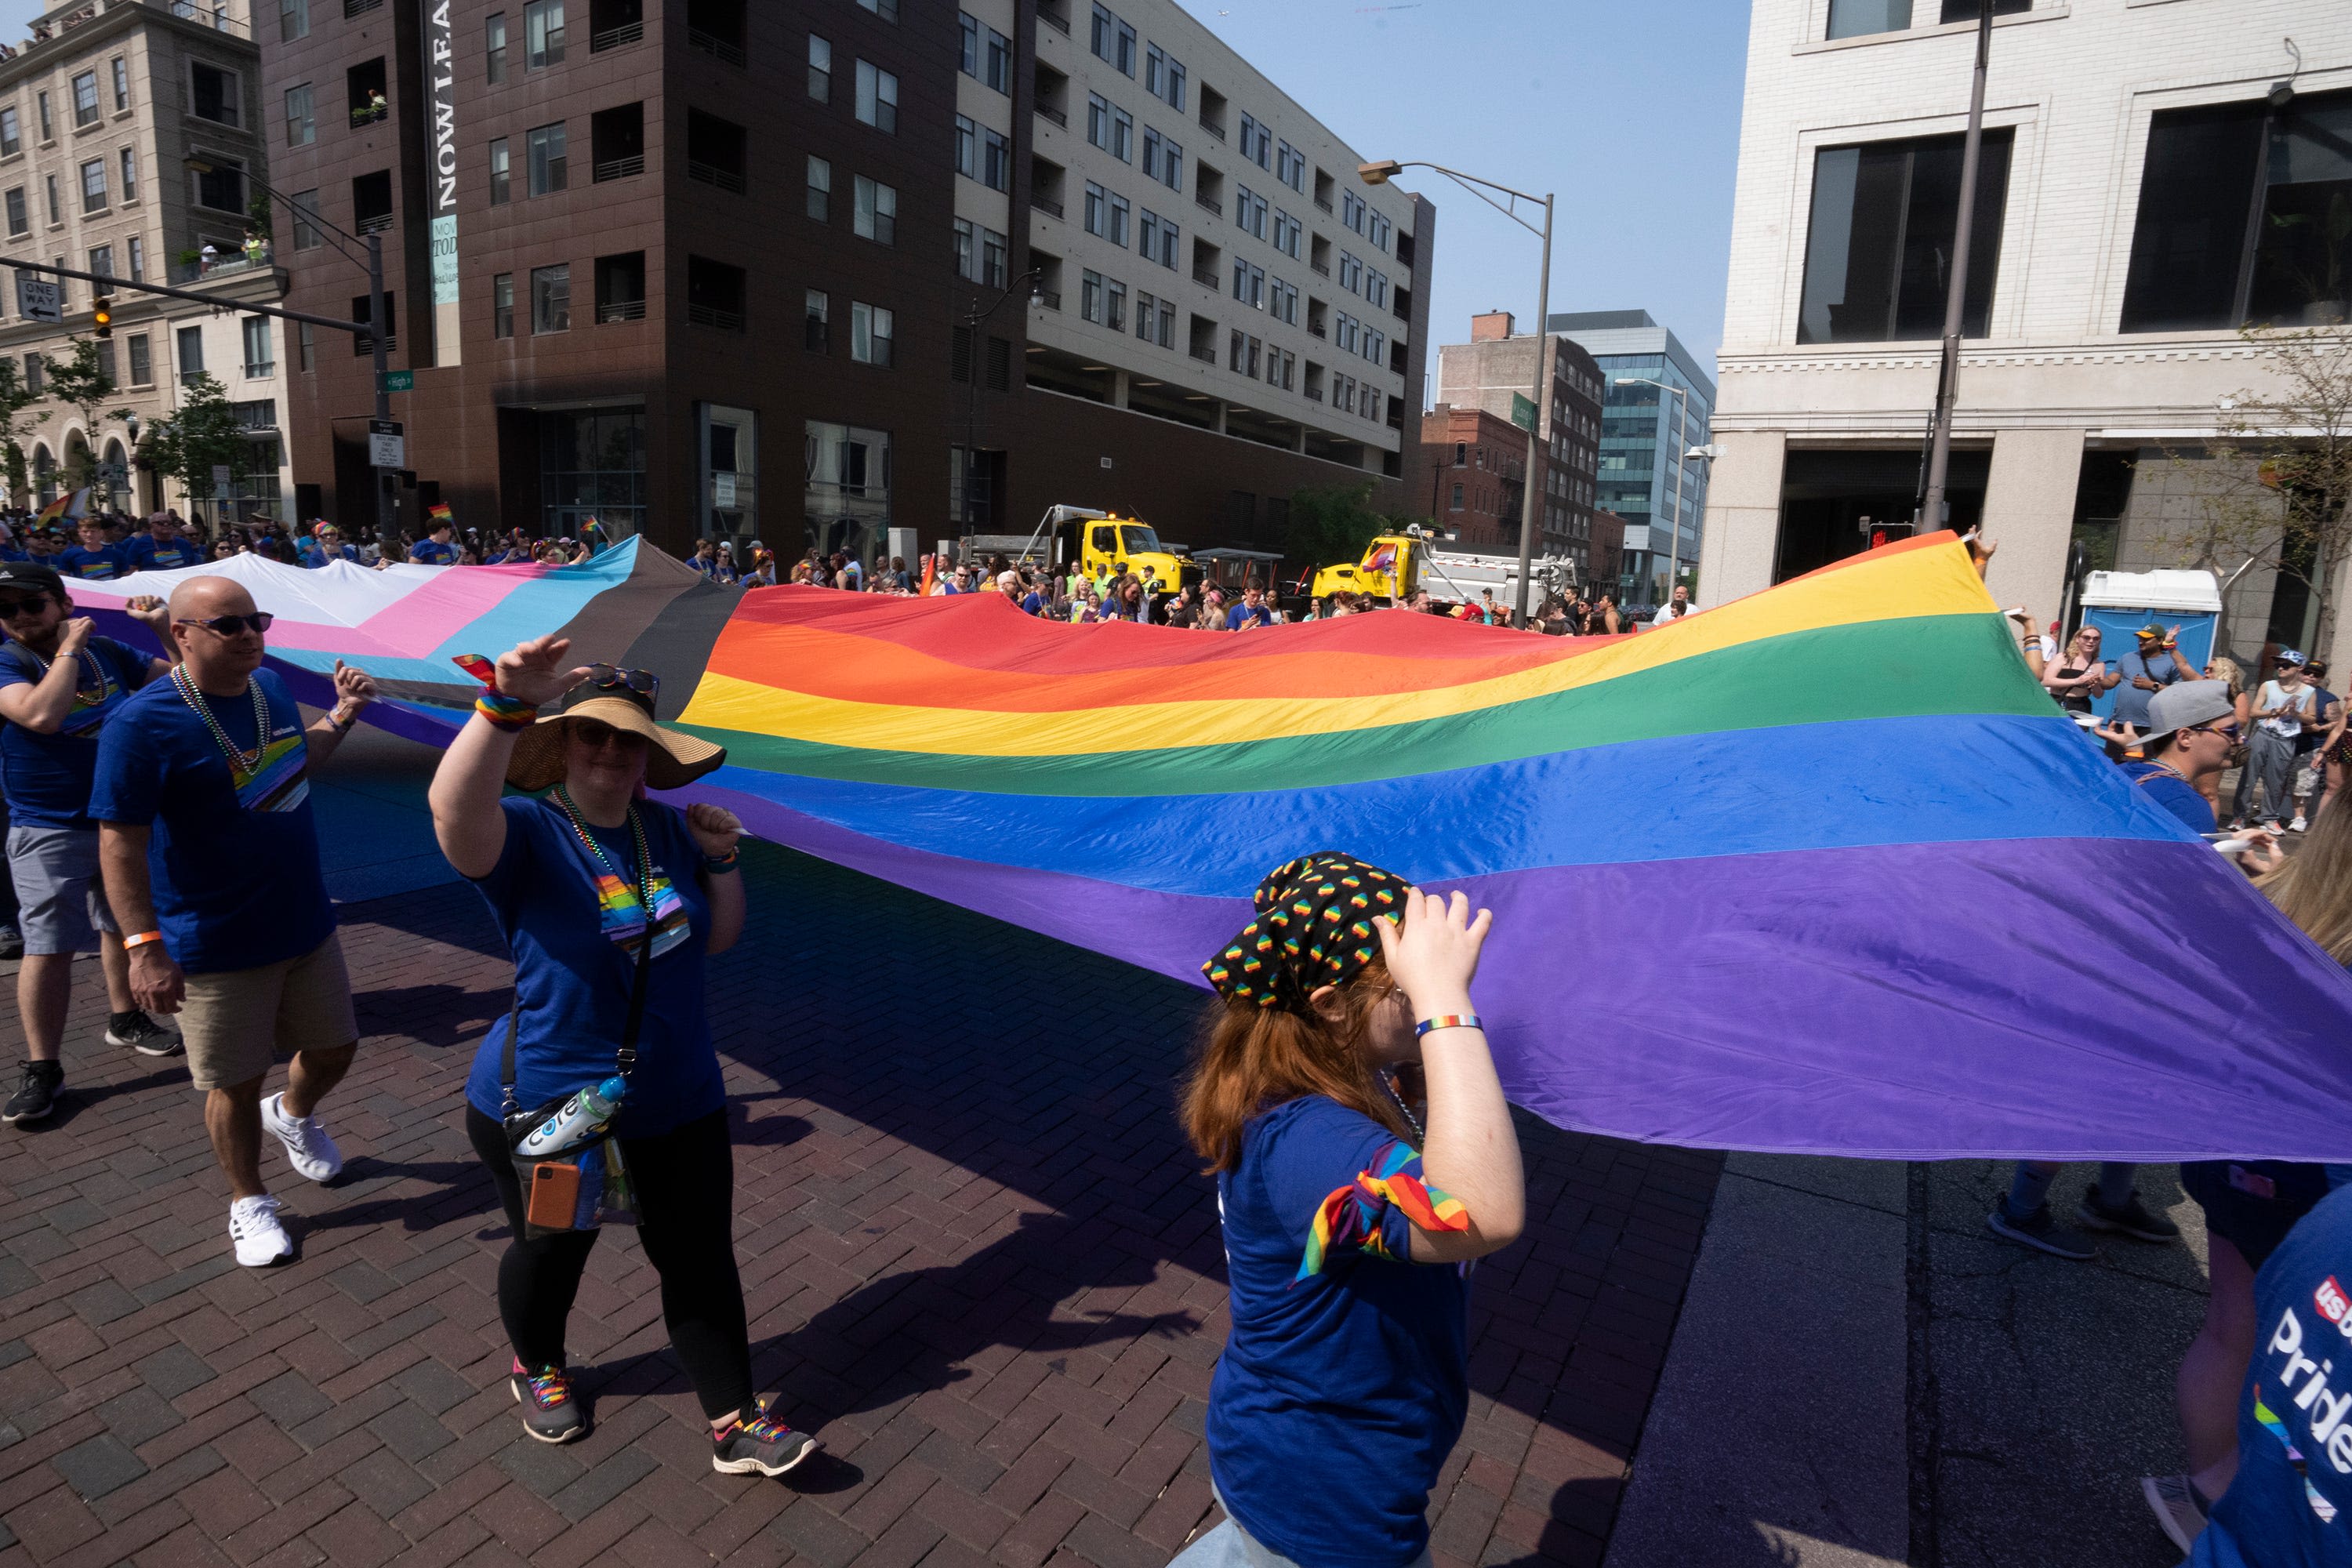 FBI warns that foreign terrorists could target Pride month events. Is Columbus prepared?